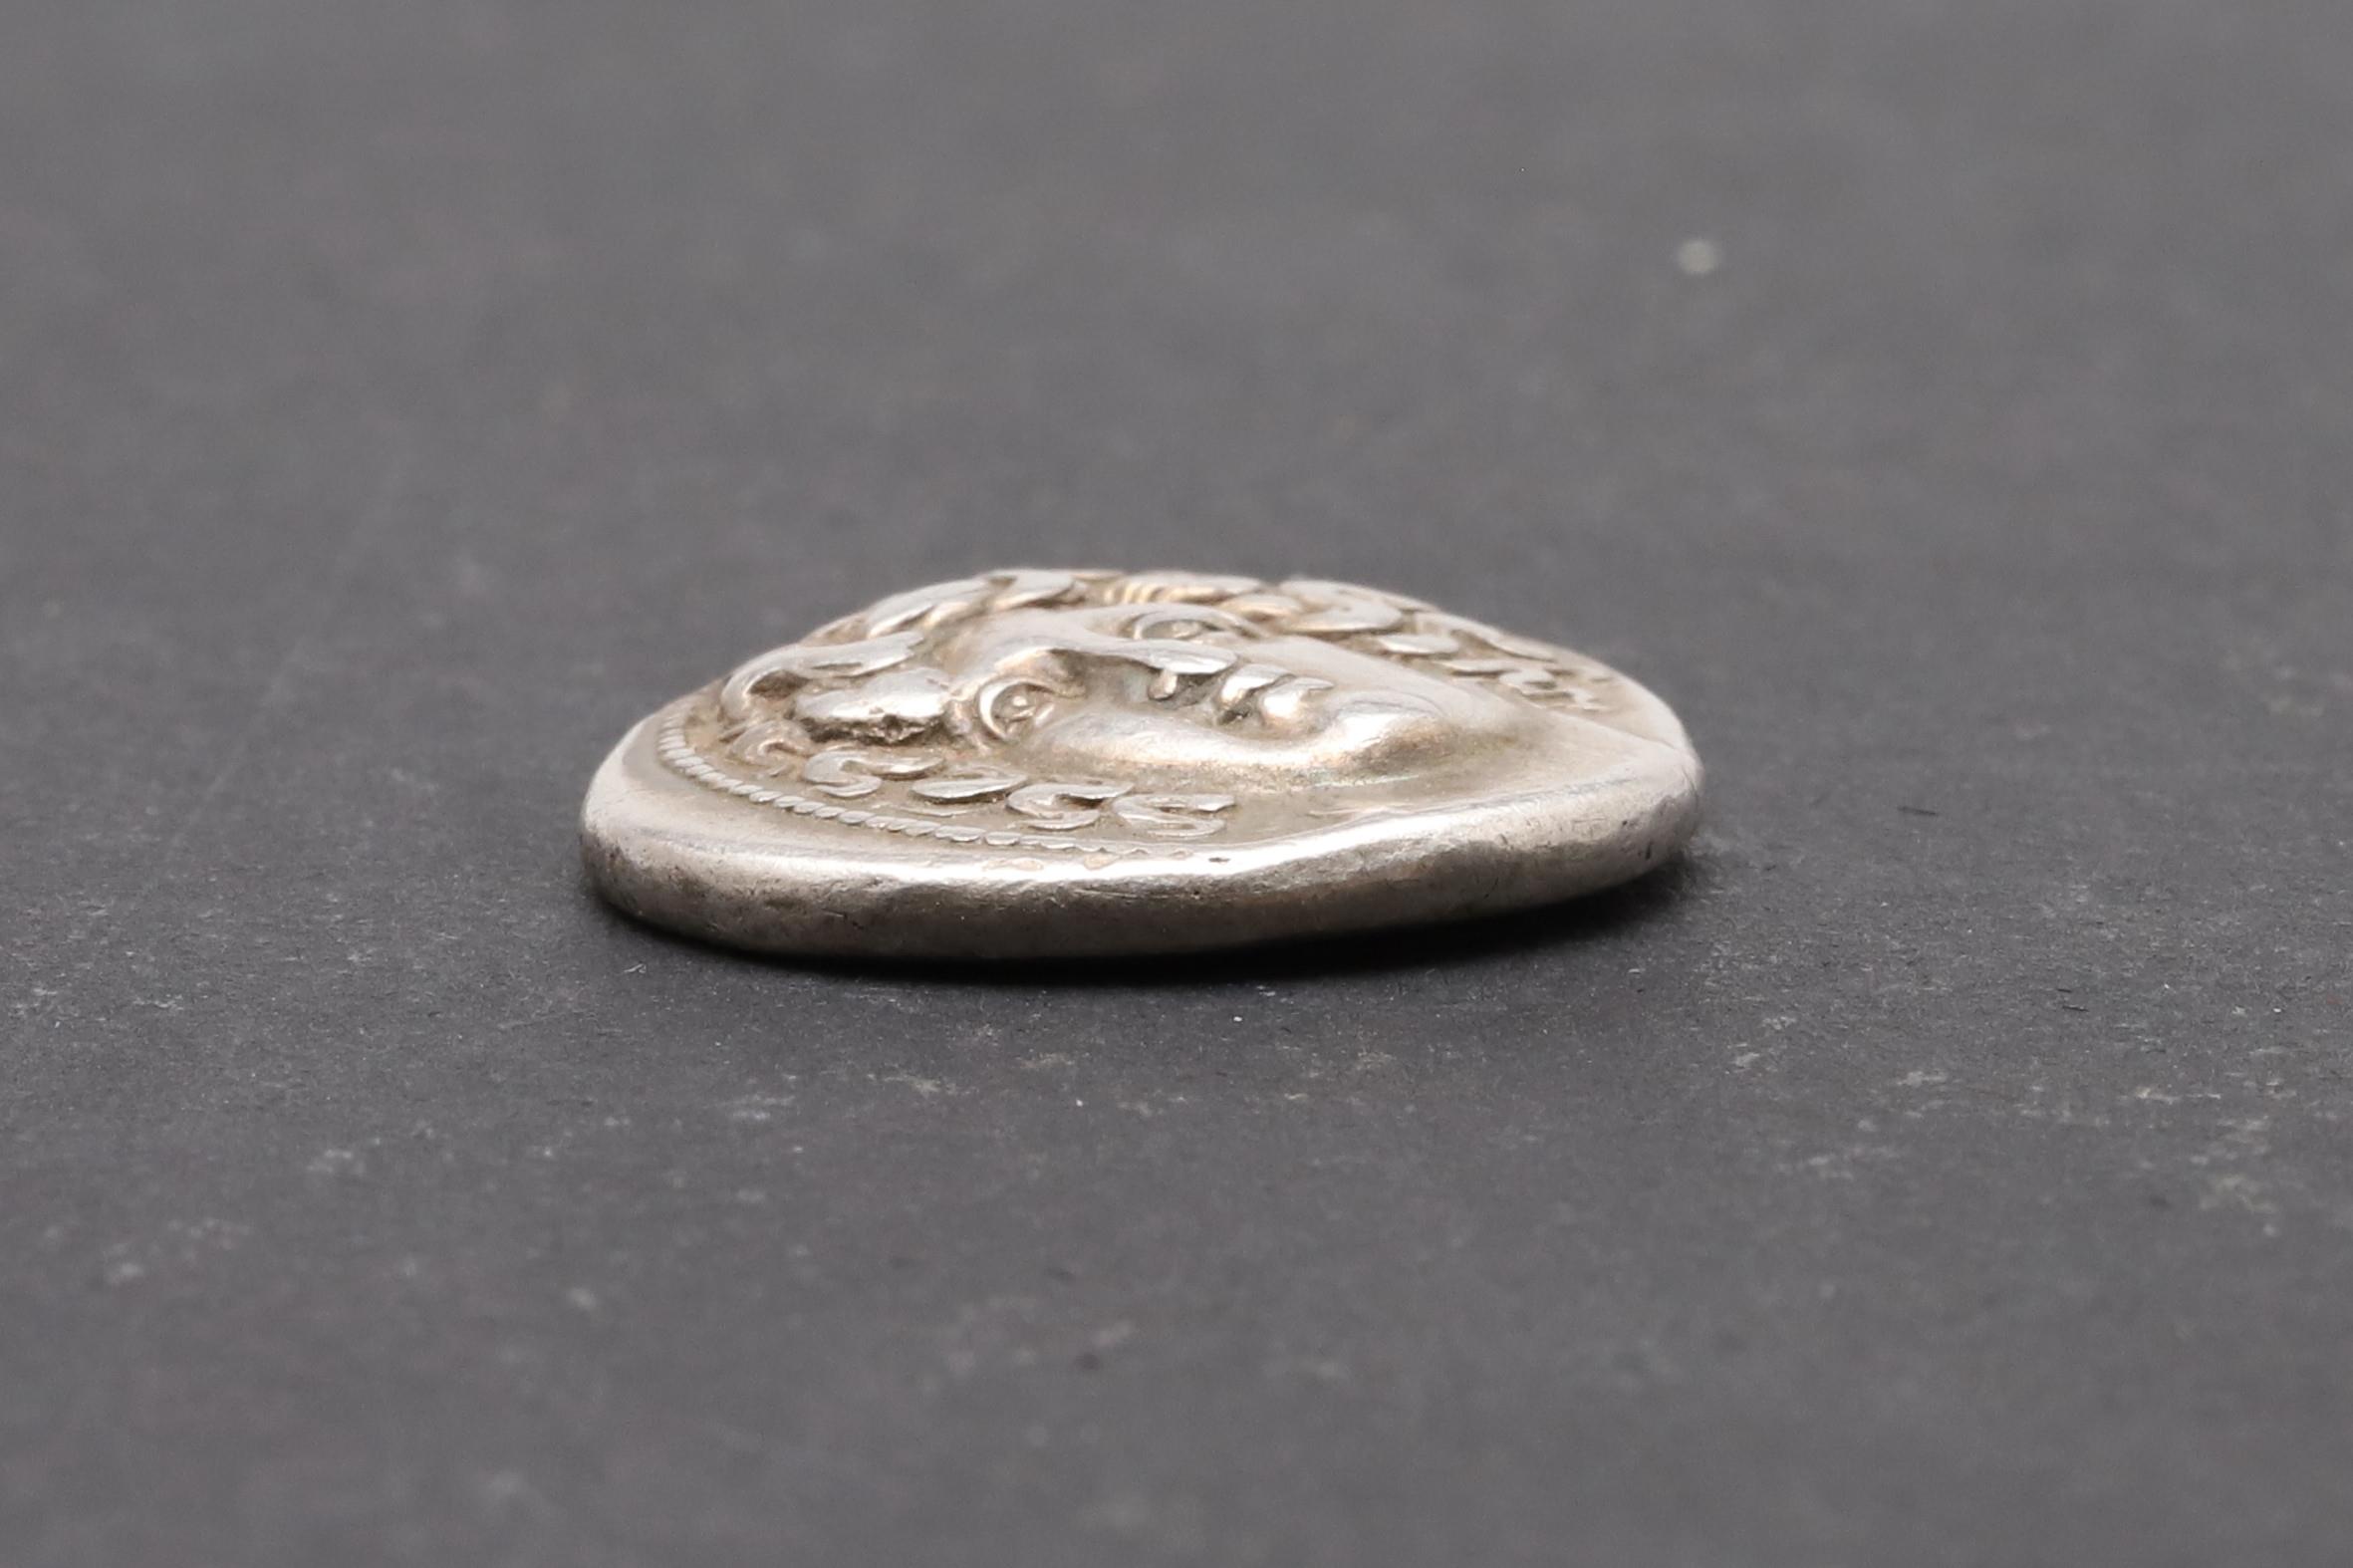 GREEK COINS: THESSALY, LARISSA, SILVER DRACHM, 350 - 325 BC. - Image 3 of 4